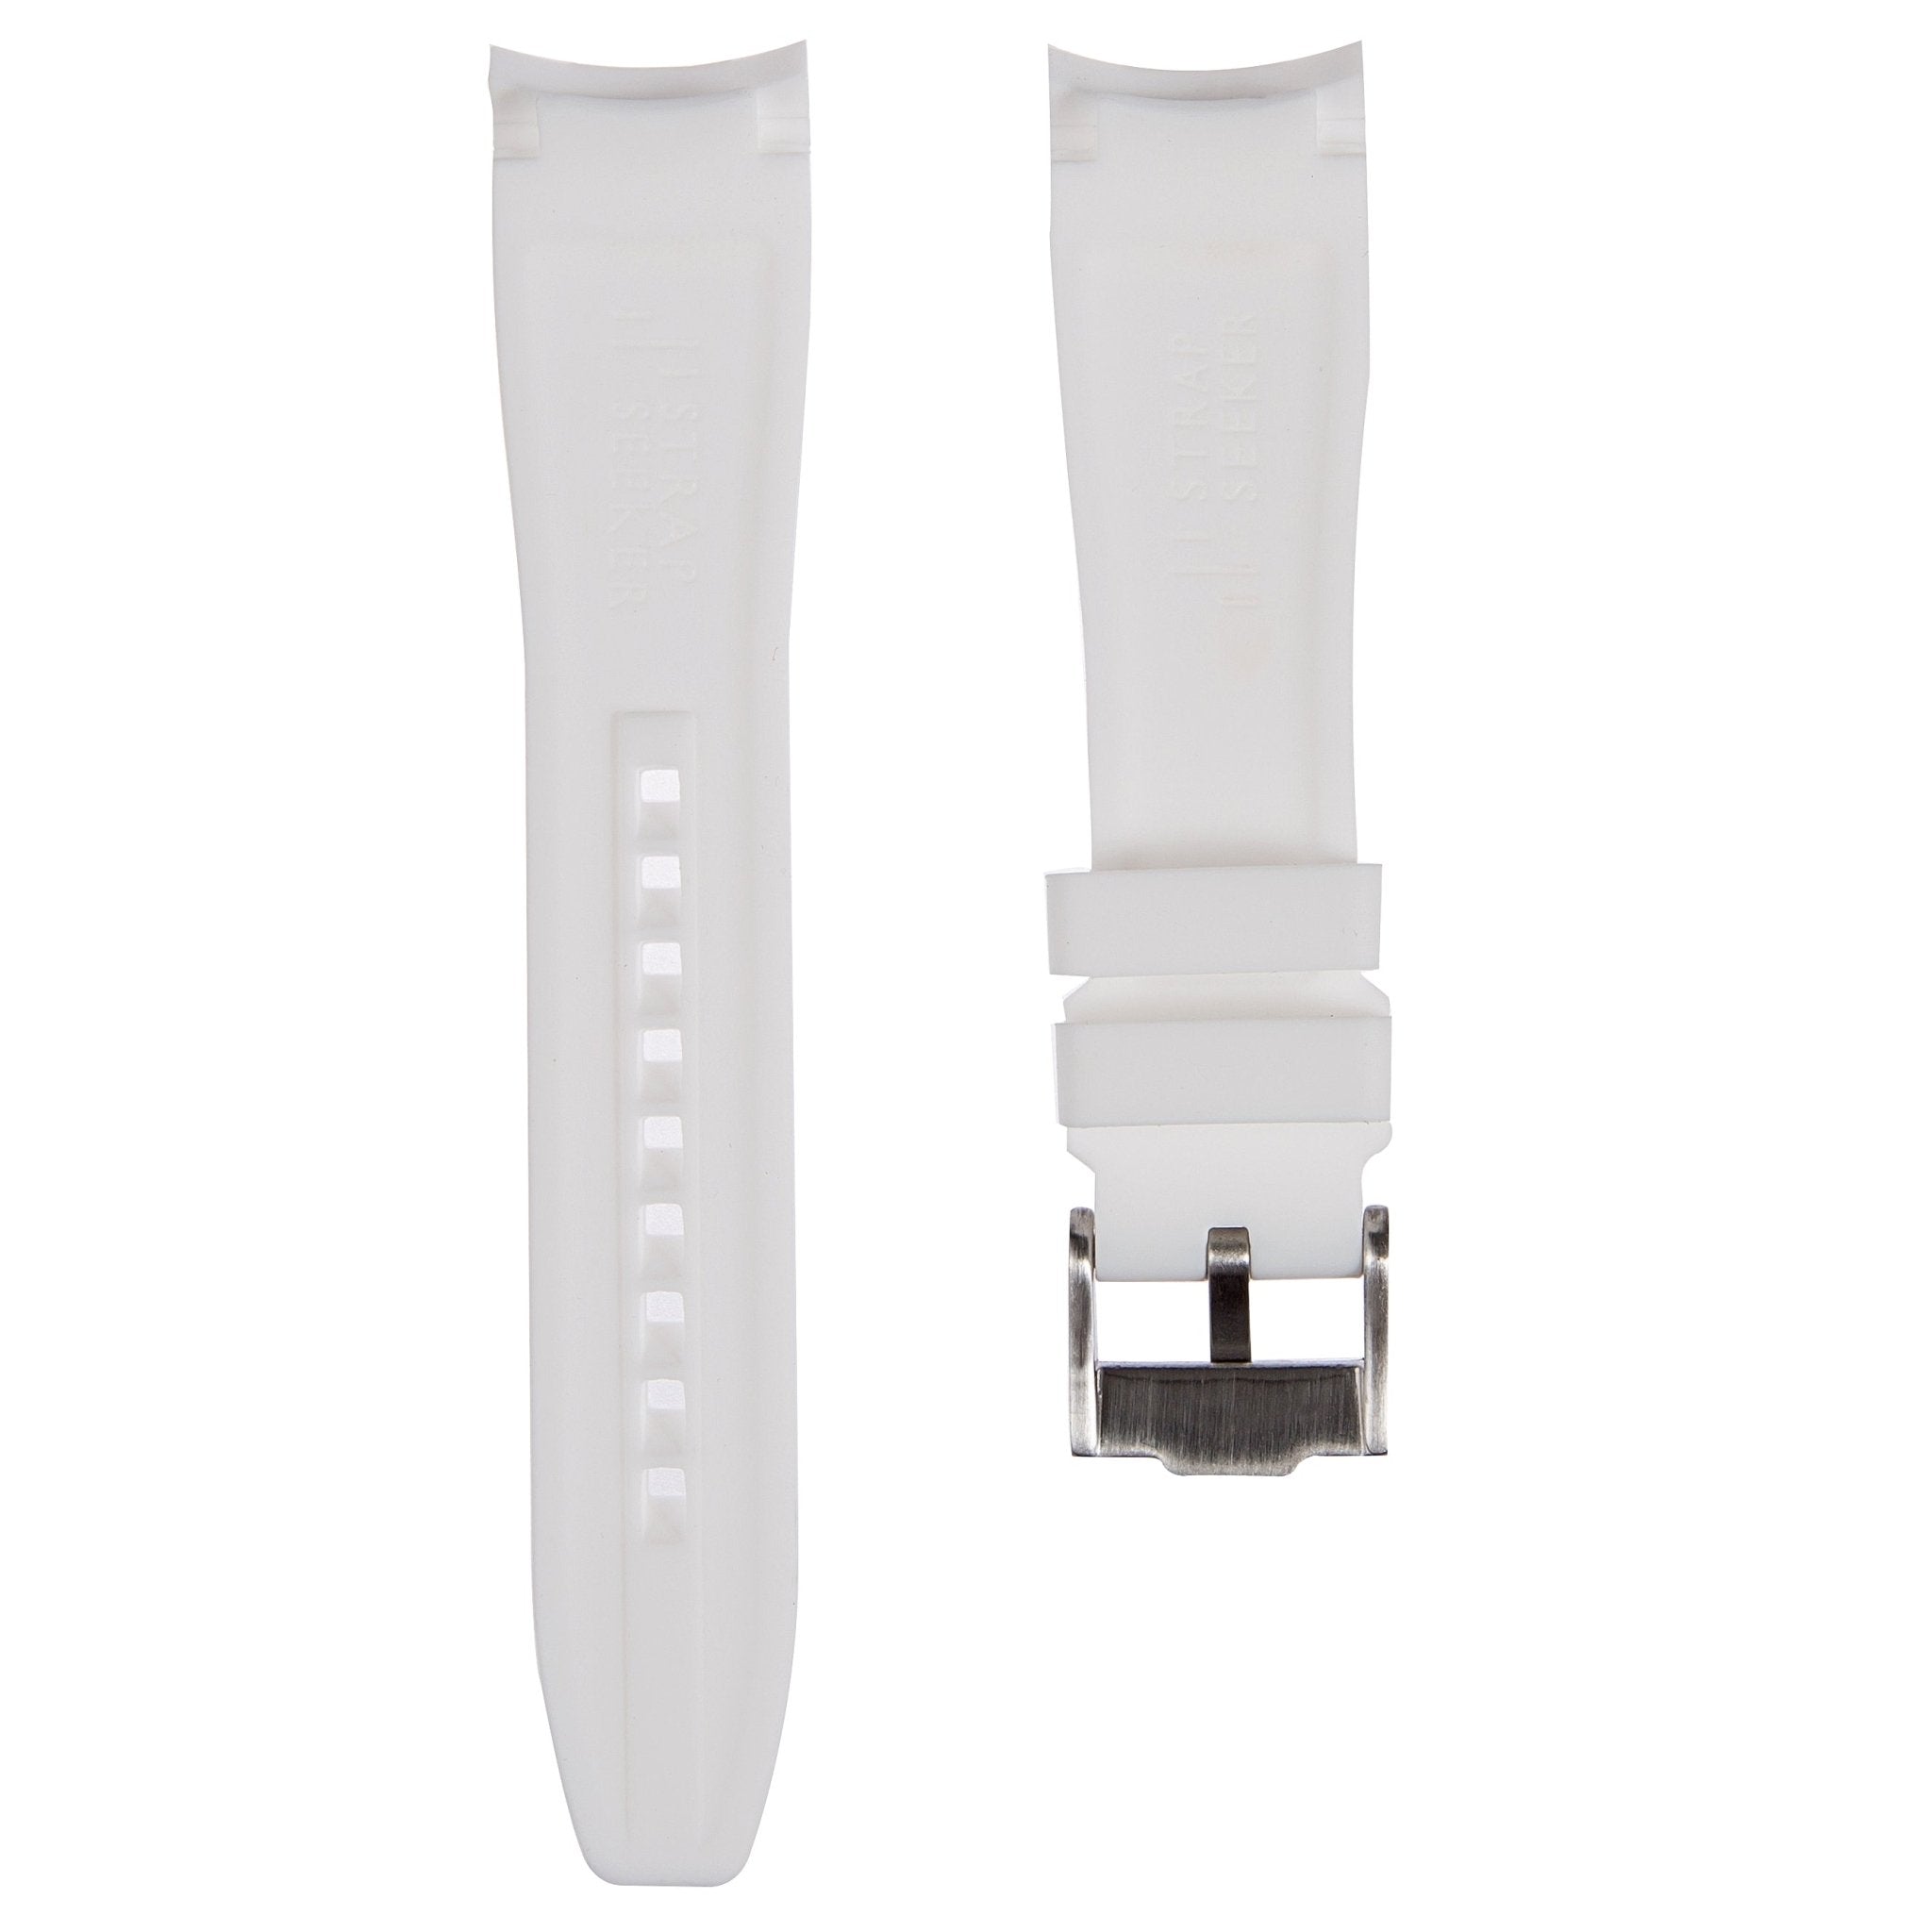 Curved End Soft Silicone Strap - Compatible with Rolex Submariner - White (2418) -StrapSeeker